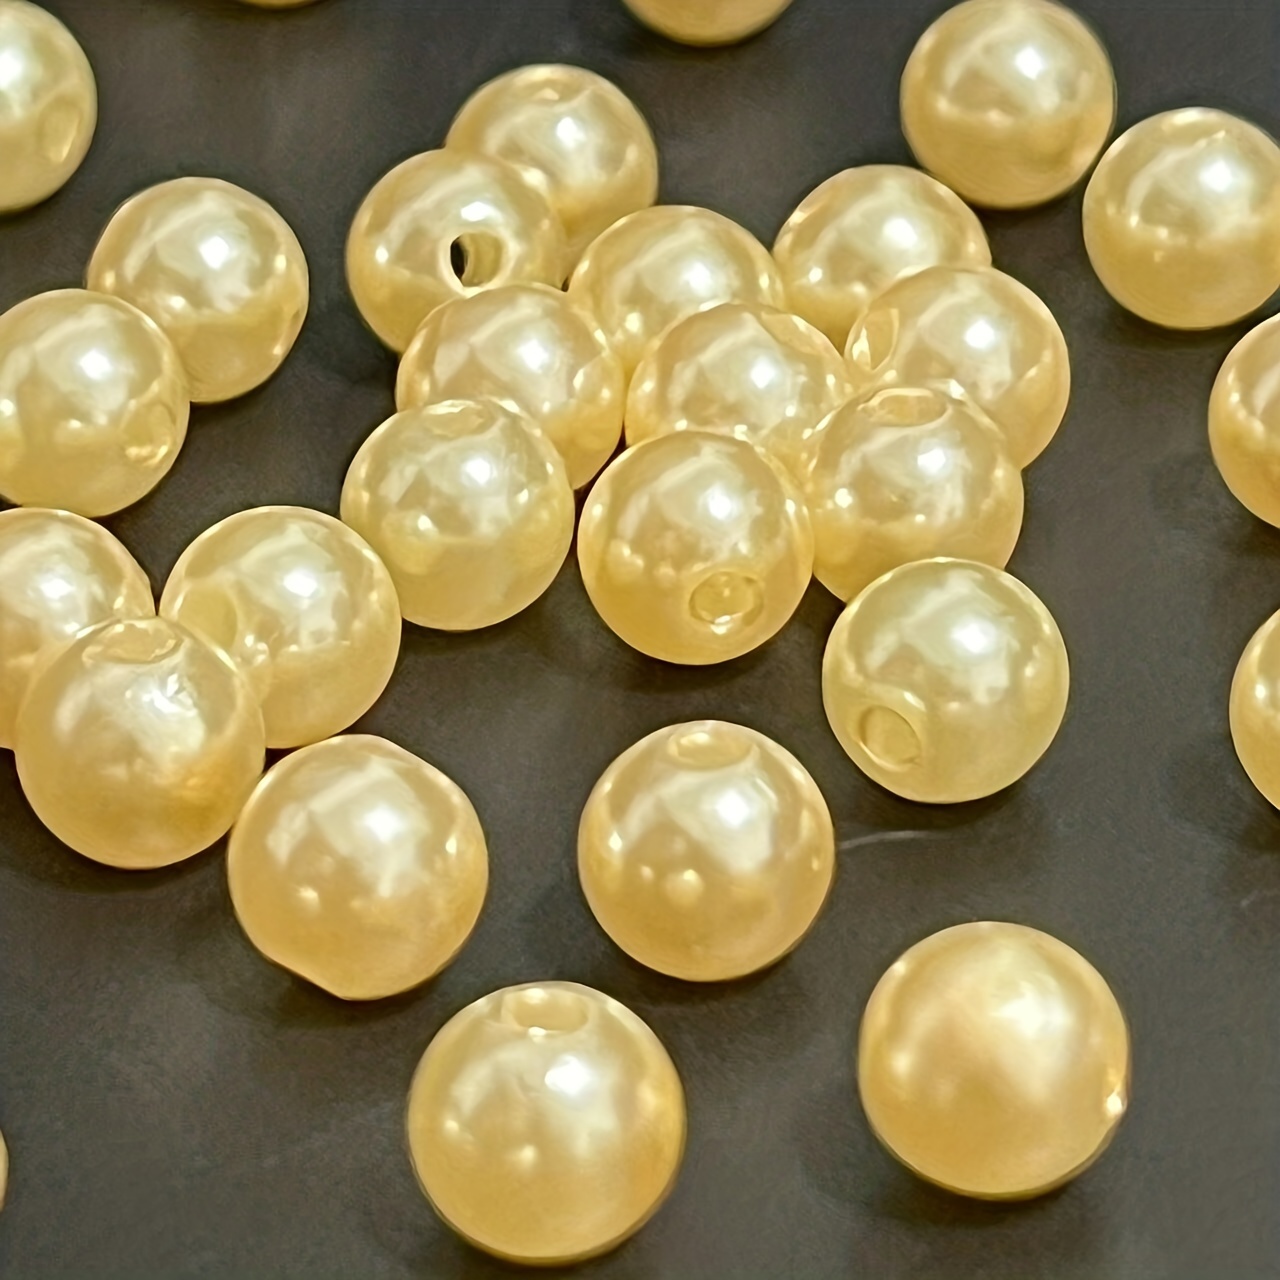 Pearls Beads, LOLASATURDAYS 1000pcs 10mm Pearl Beads for Jewelry Making,  Pearls for Crafts, perlas, Pearl Beads for Crafting, perlas para bisuteria